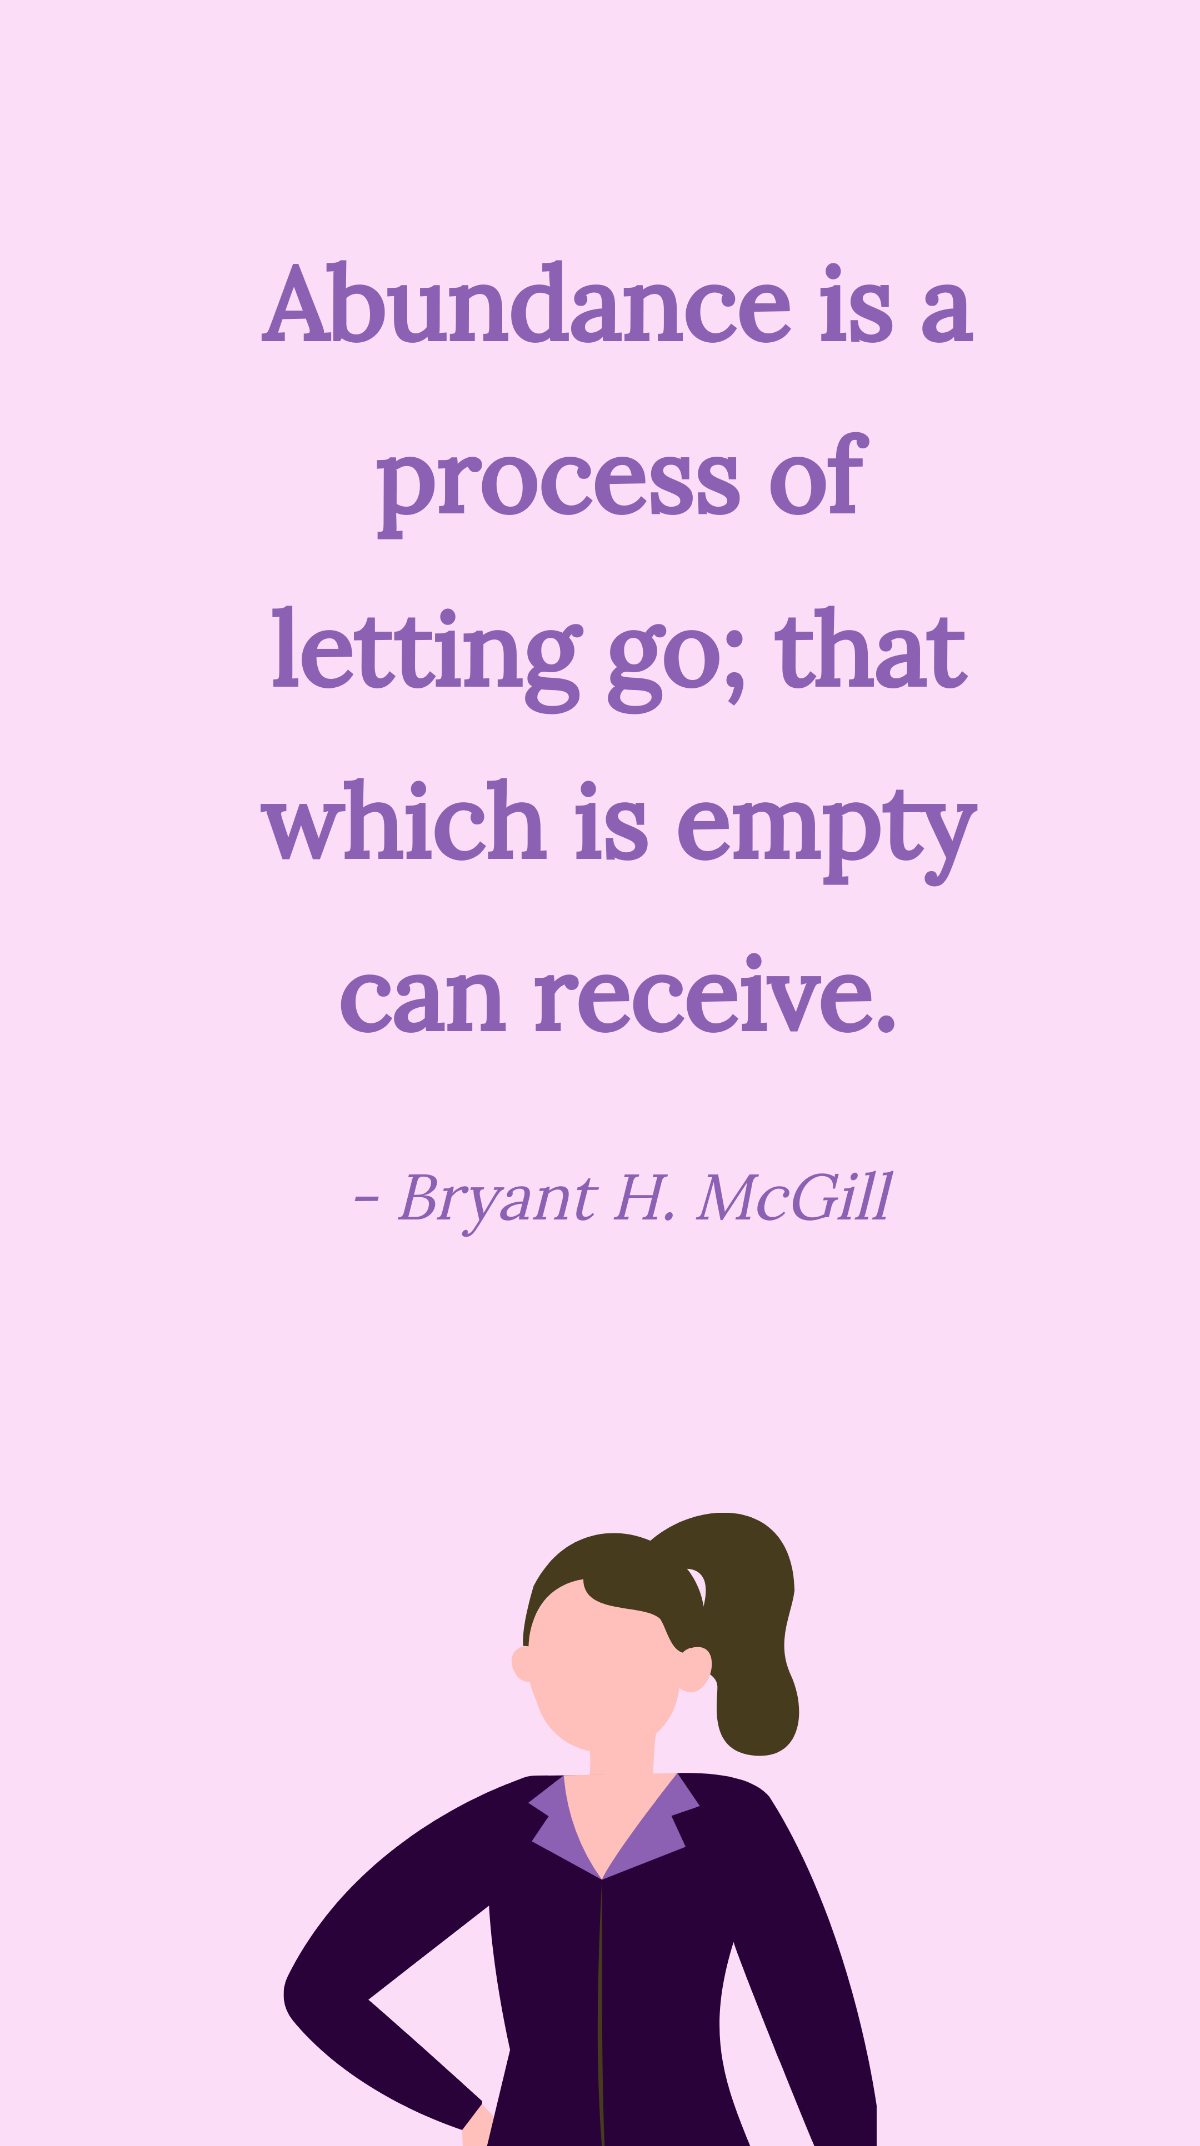 Bryant H. McGill - Abundance is a process of letting go; that which is empty can receive.